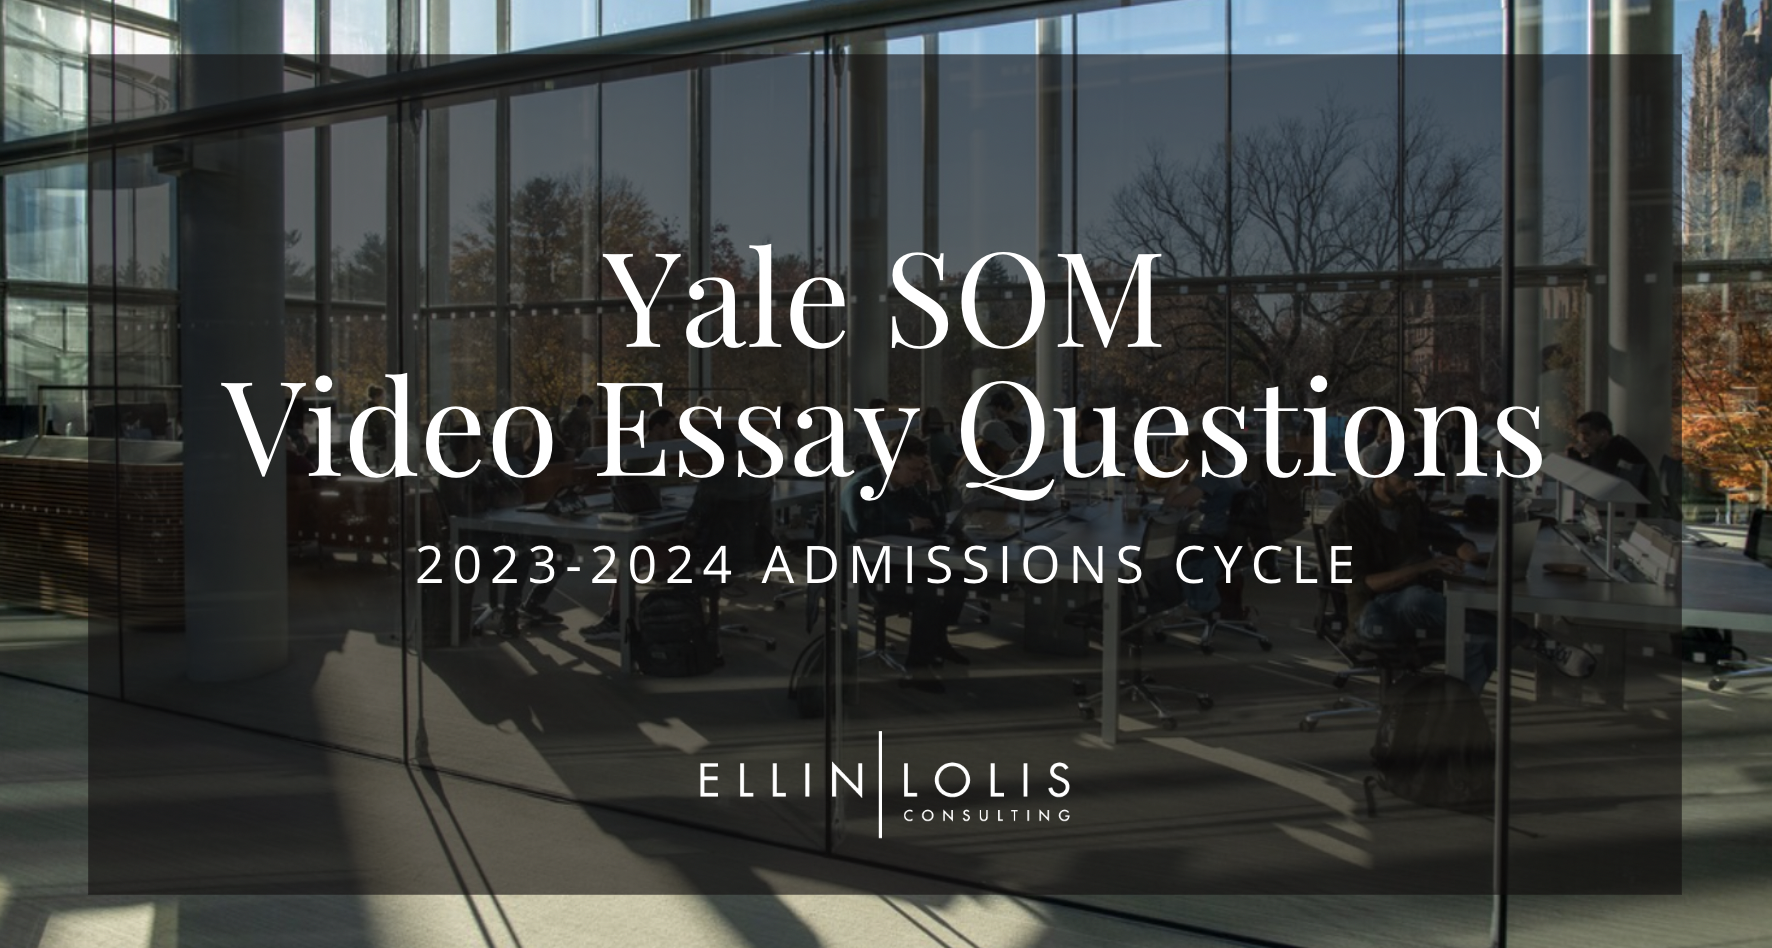 The Yale SOM Video Essay Questions – And How to Successfully Answer Them